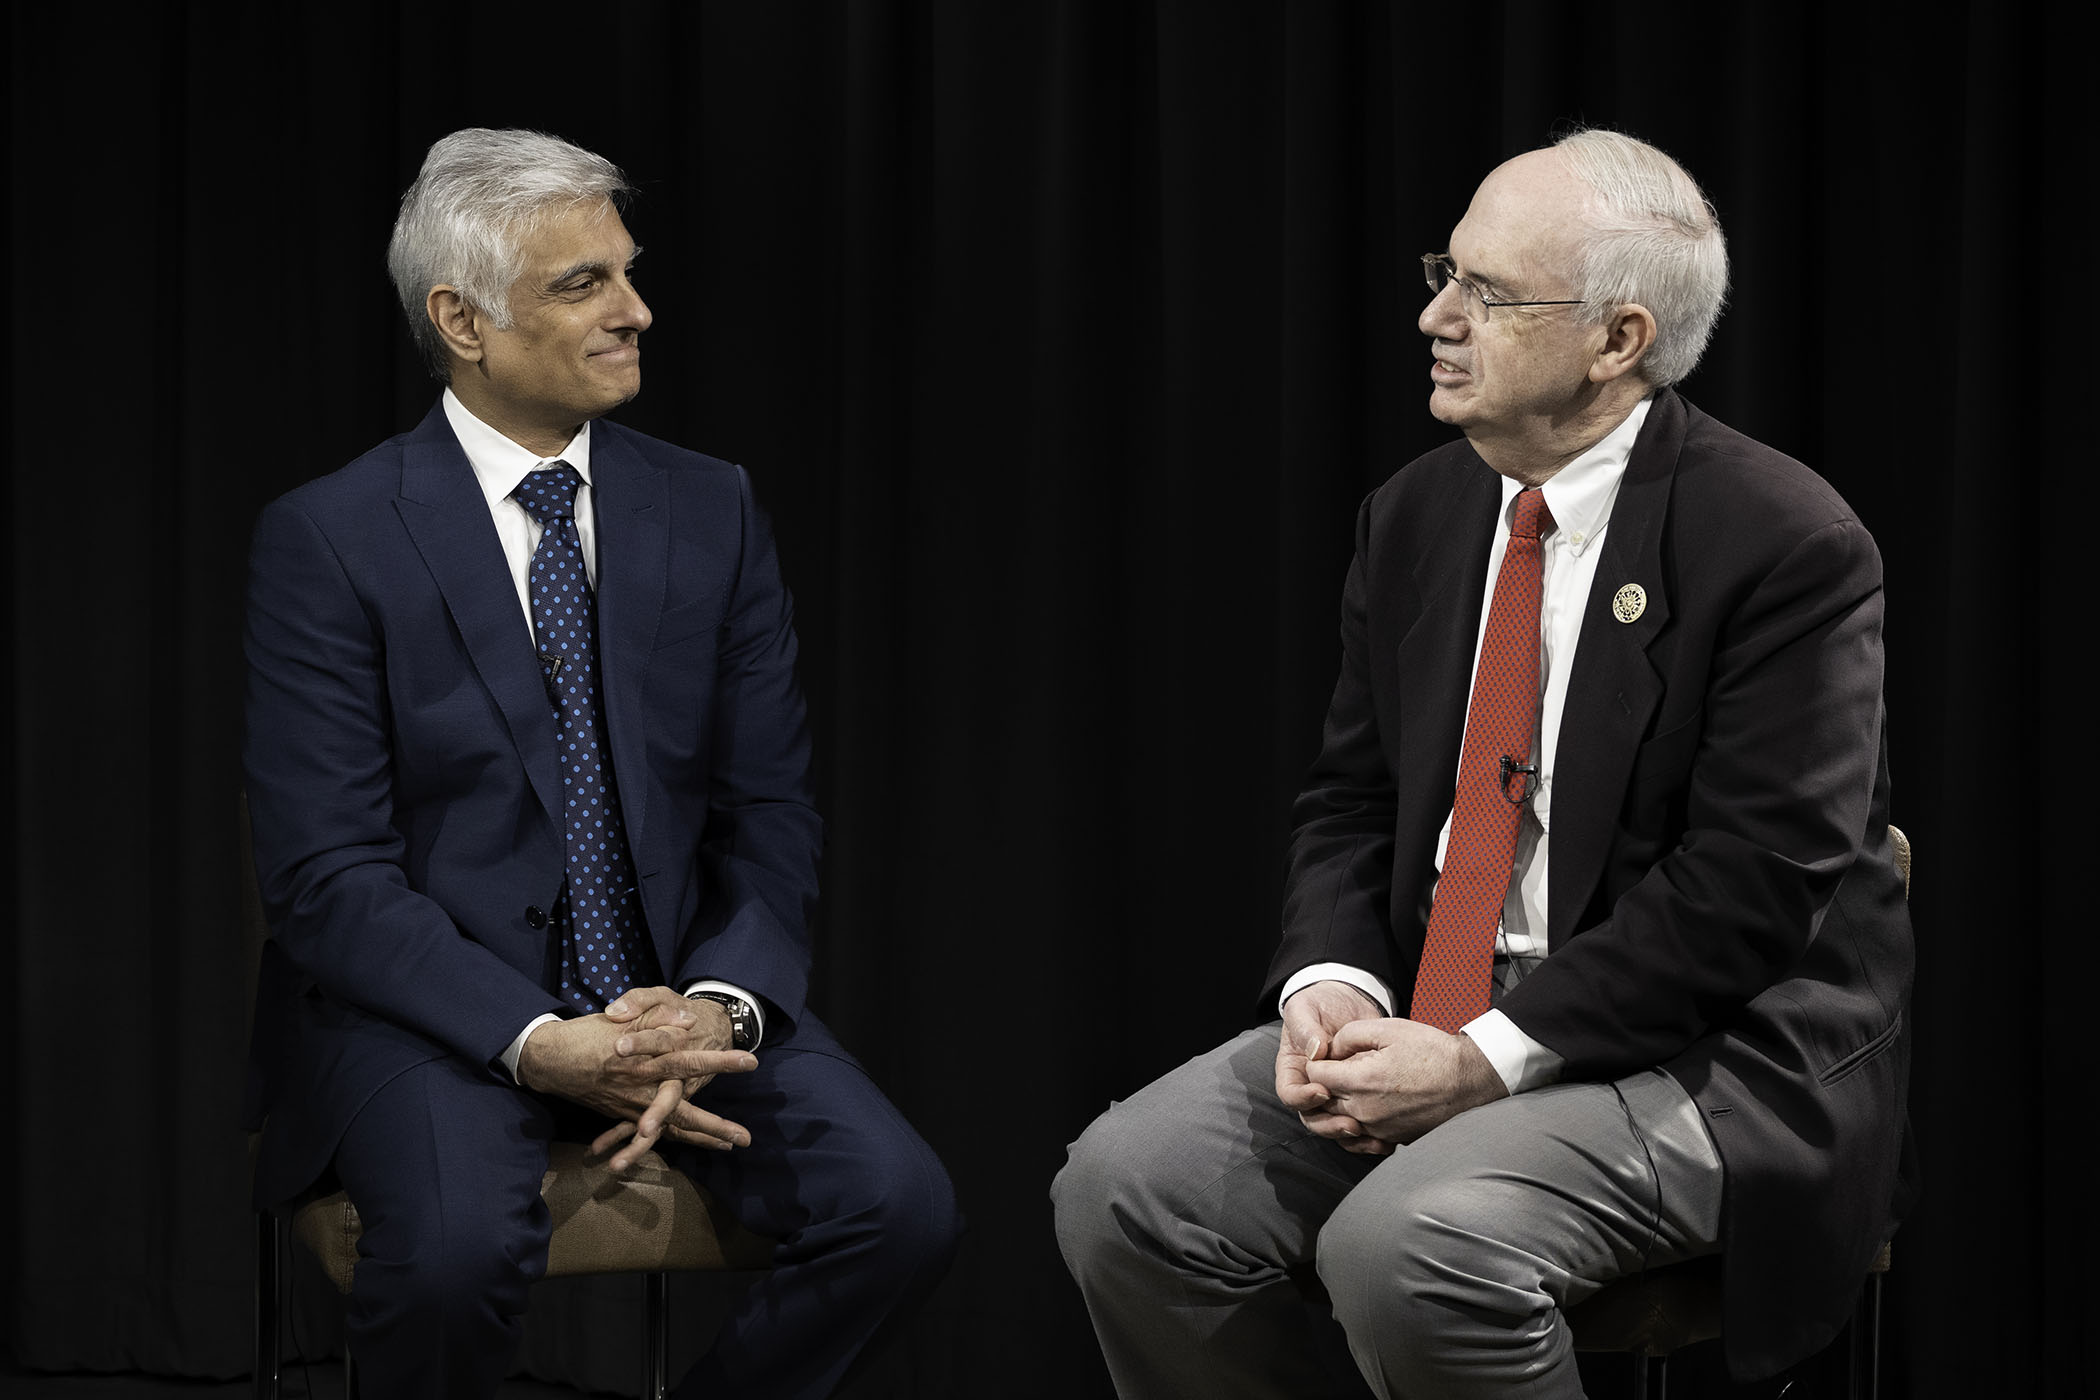 Sunil Hingorani&comma; MD&comma; PhD&comma; director of the Center of Excellence in Pancreatic Cancer at the Fred and Pamela Buffett Cancer Center&comma; and UNMC Chancellor Jeffrey P&period; Gold&comma; MD